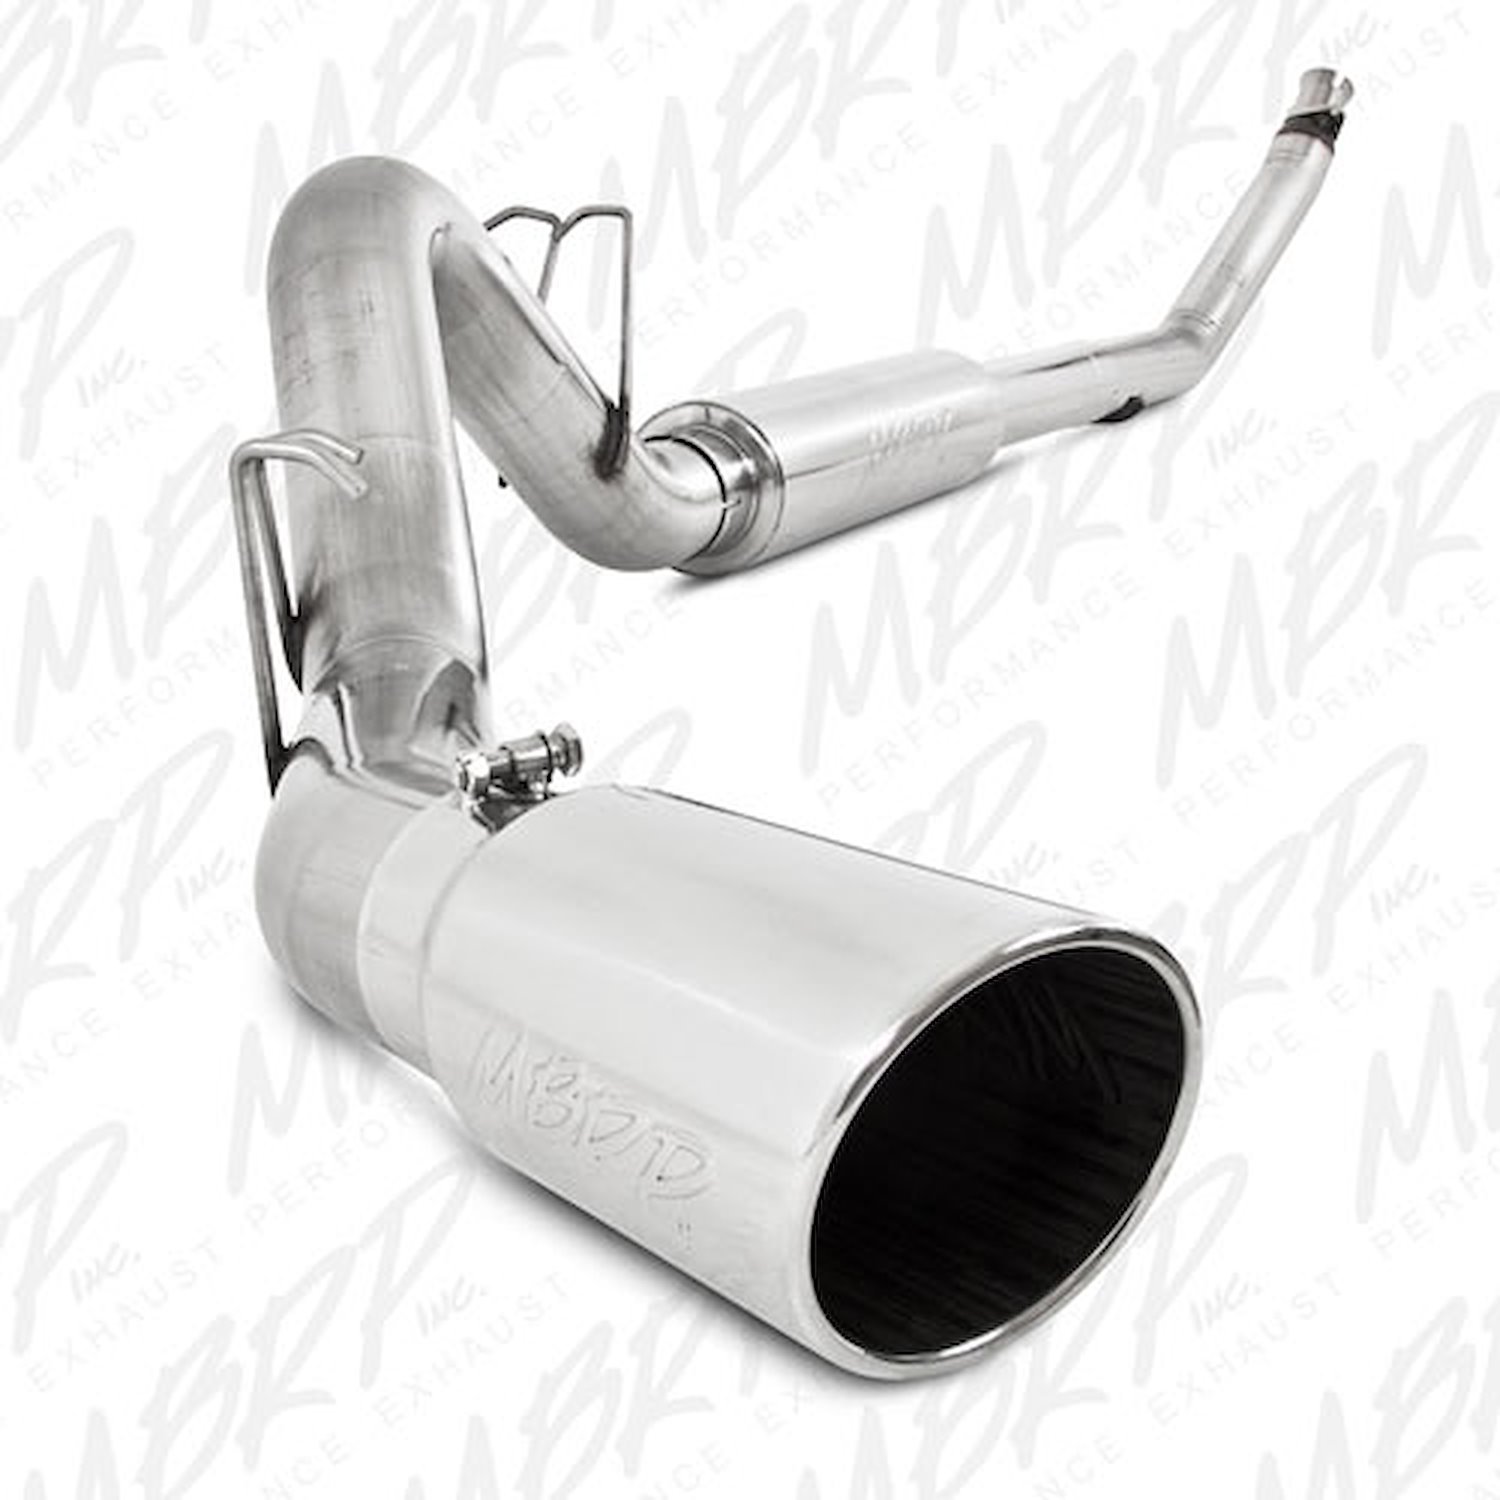 XP Series Exhaust System 1994-2002 Dodge 2500/3500 for Cummins 5.9L